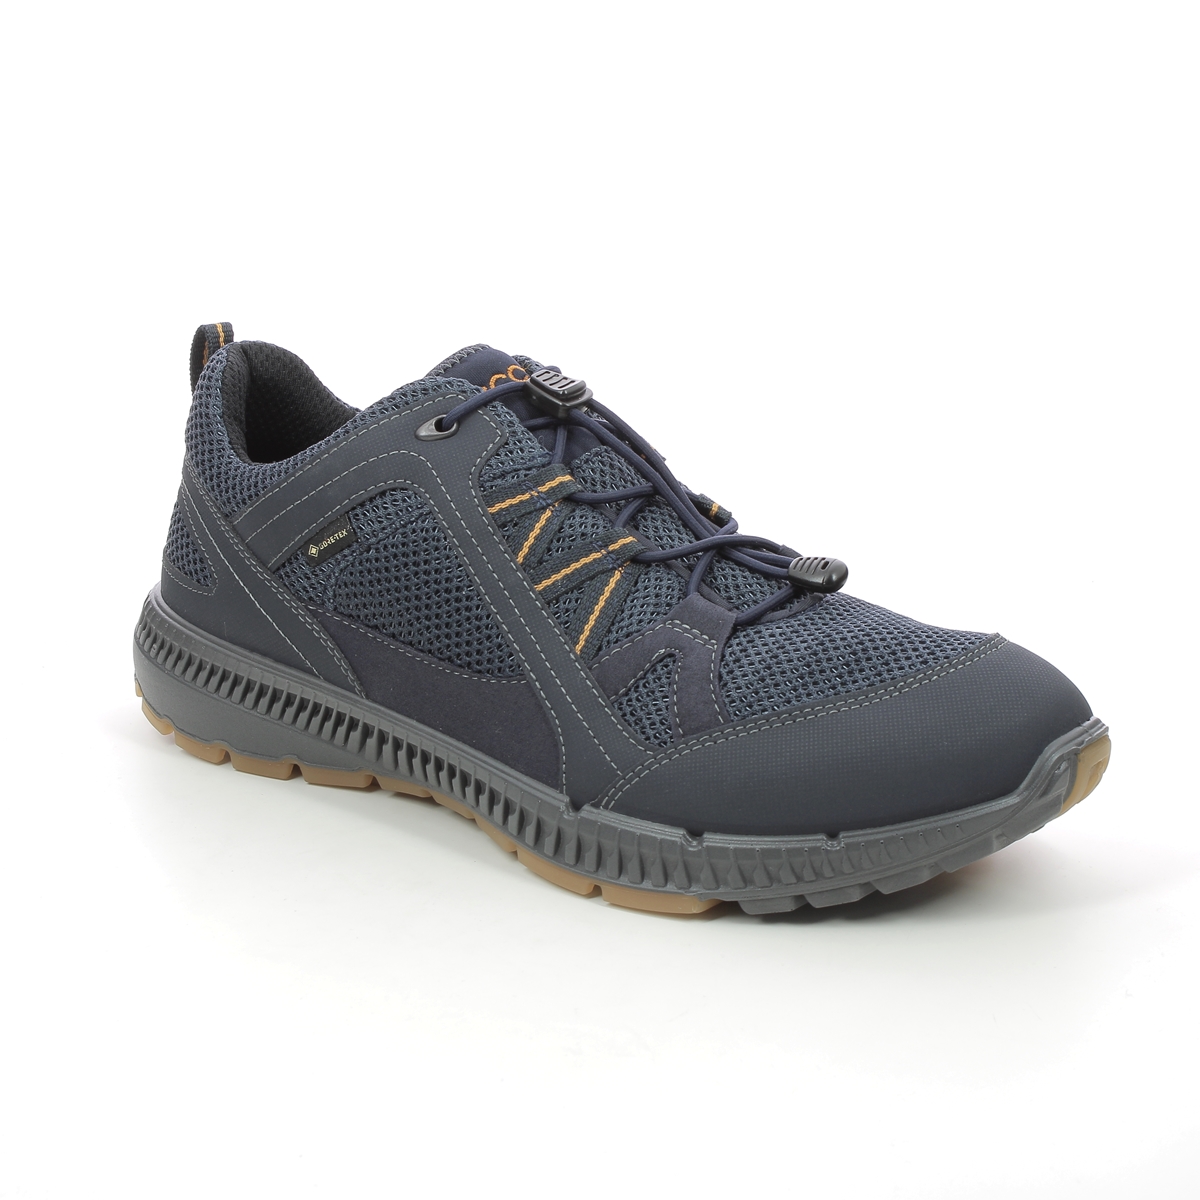 Ecco Terracruise Gtx Navy Mens Trainers 843064-51241 In Size 43 In Plain Navy